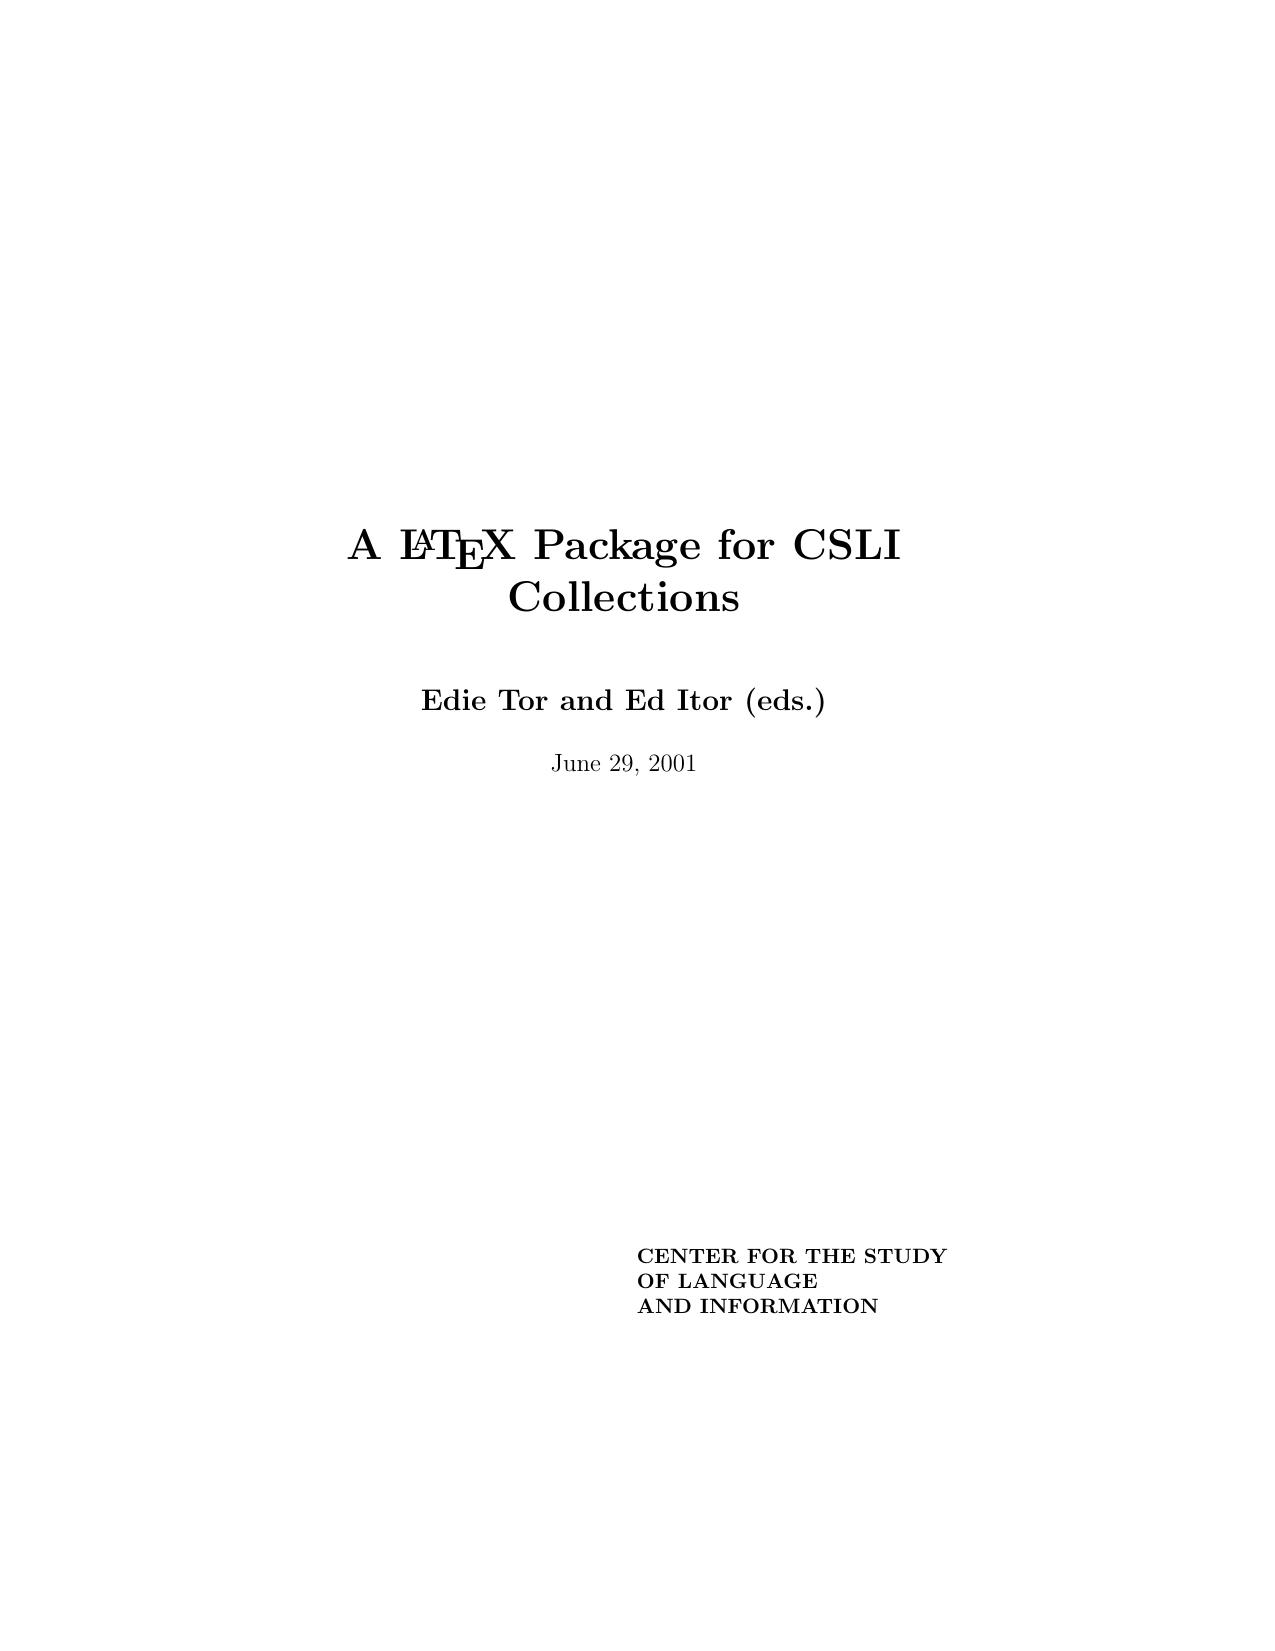 A LaTeX Package for CSLI Collections - Draft